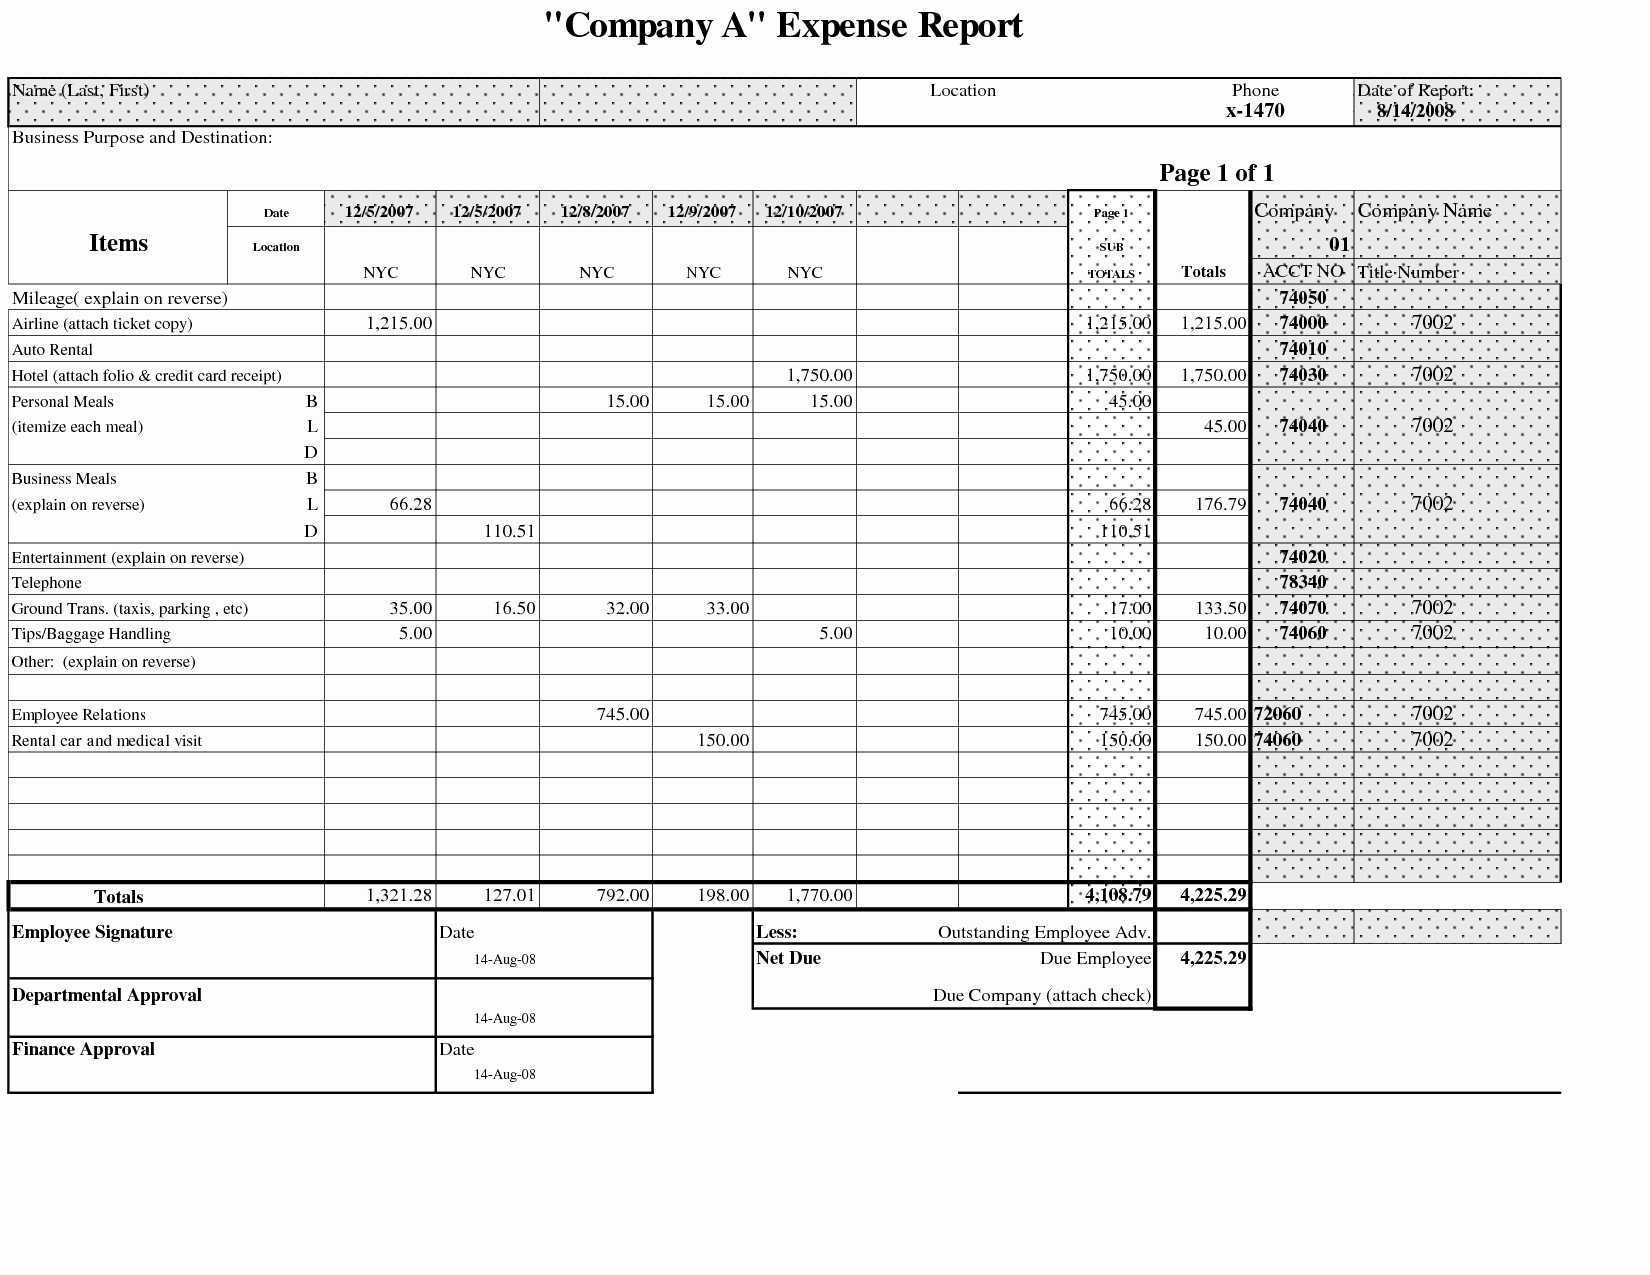 Gas Mileage Spreadsheet Of Annual Expense Report Template Or Throughout Gas Mileage Expense Report Template